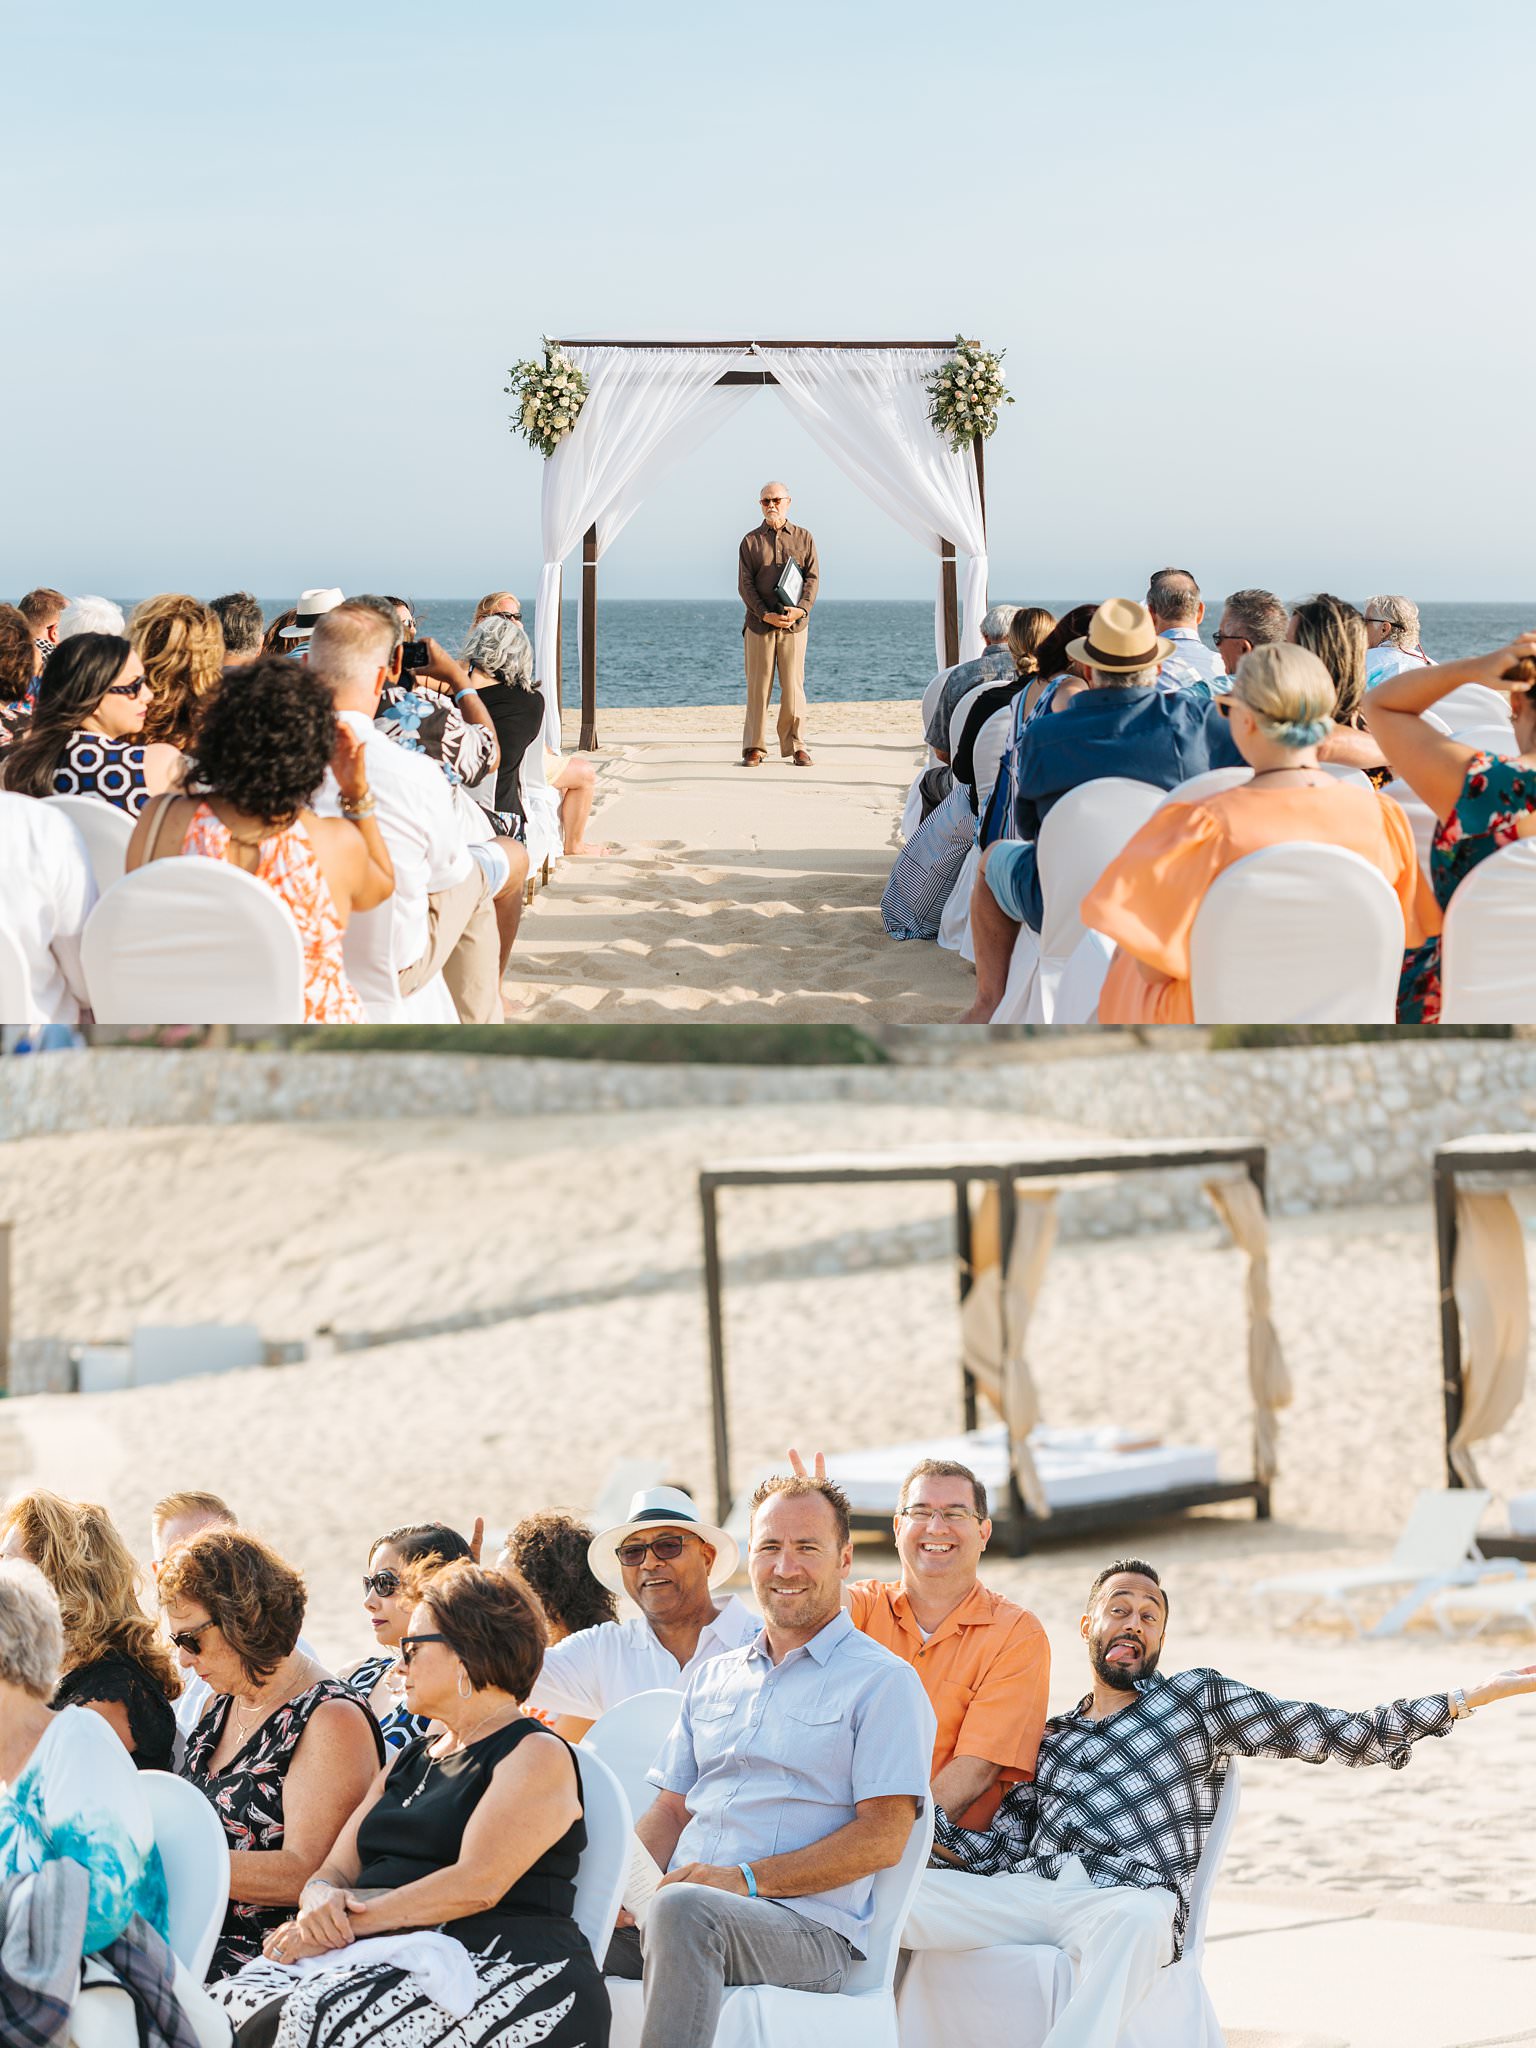 Beach Ceremony in Cabo San Lucas, Mexico - https://brittneyhannonphotography.com